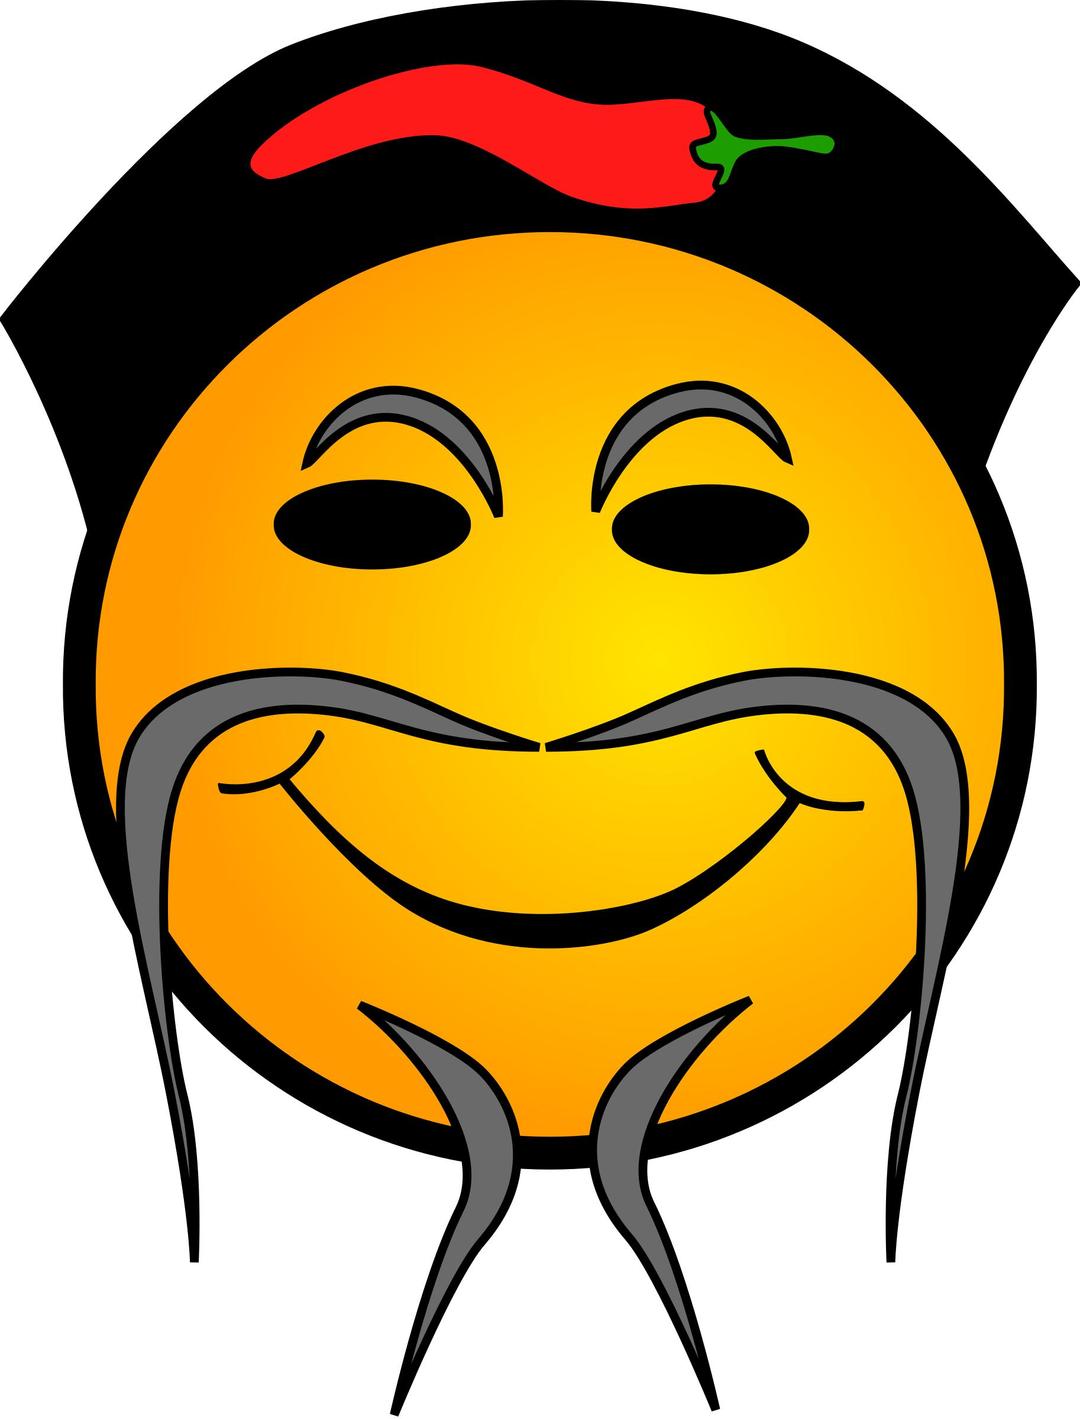 Chinese Cook Smiley png transparent